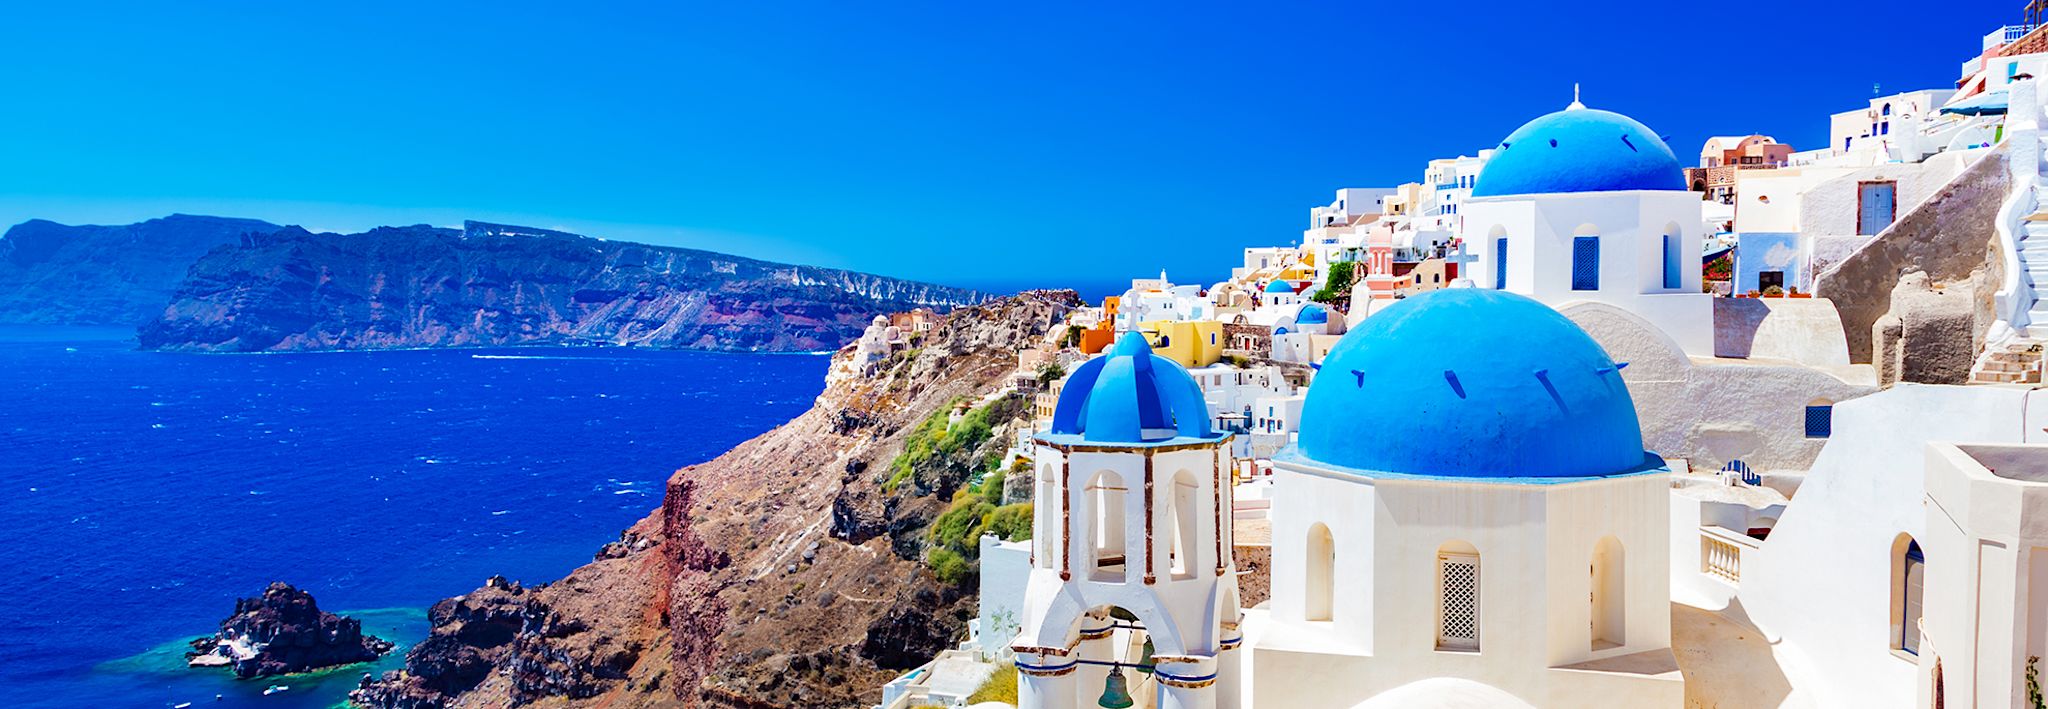 Greece is full of vibrant colors.